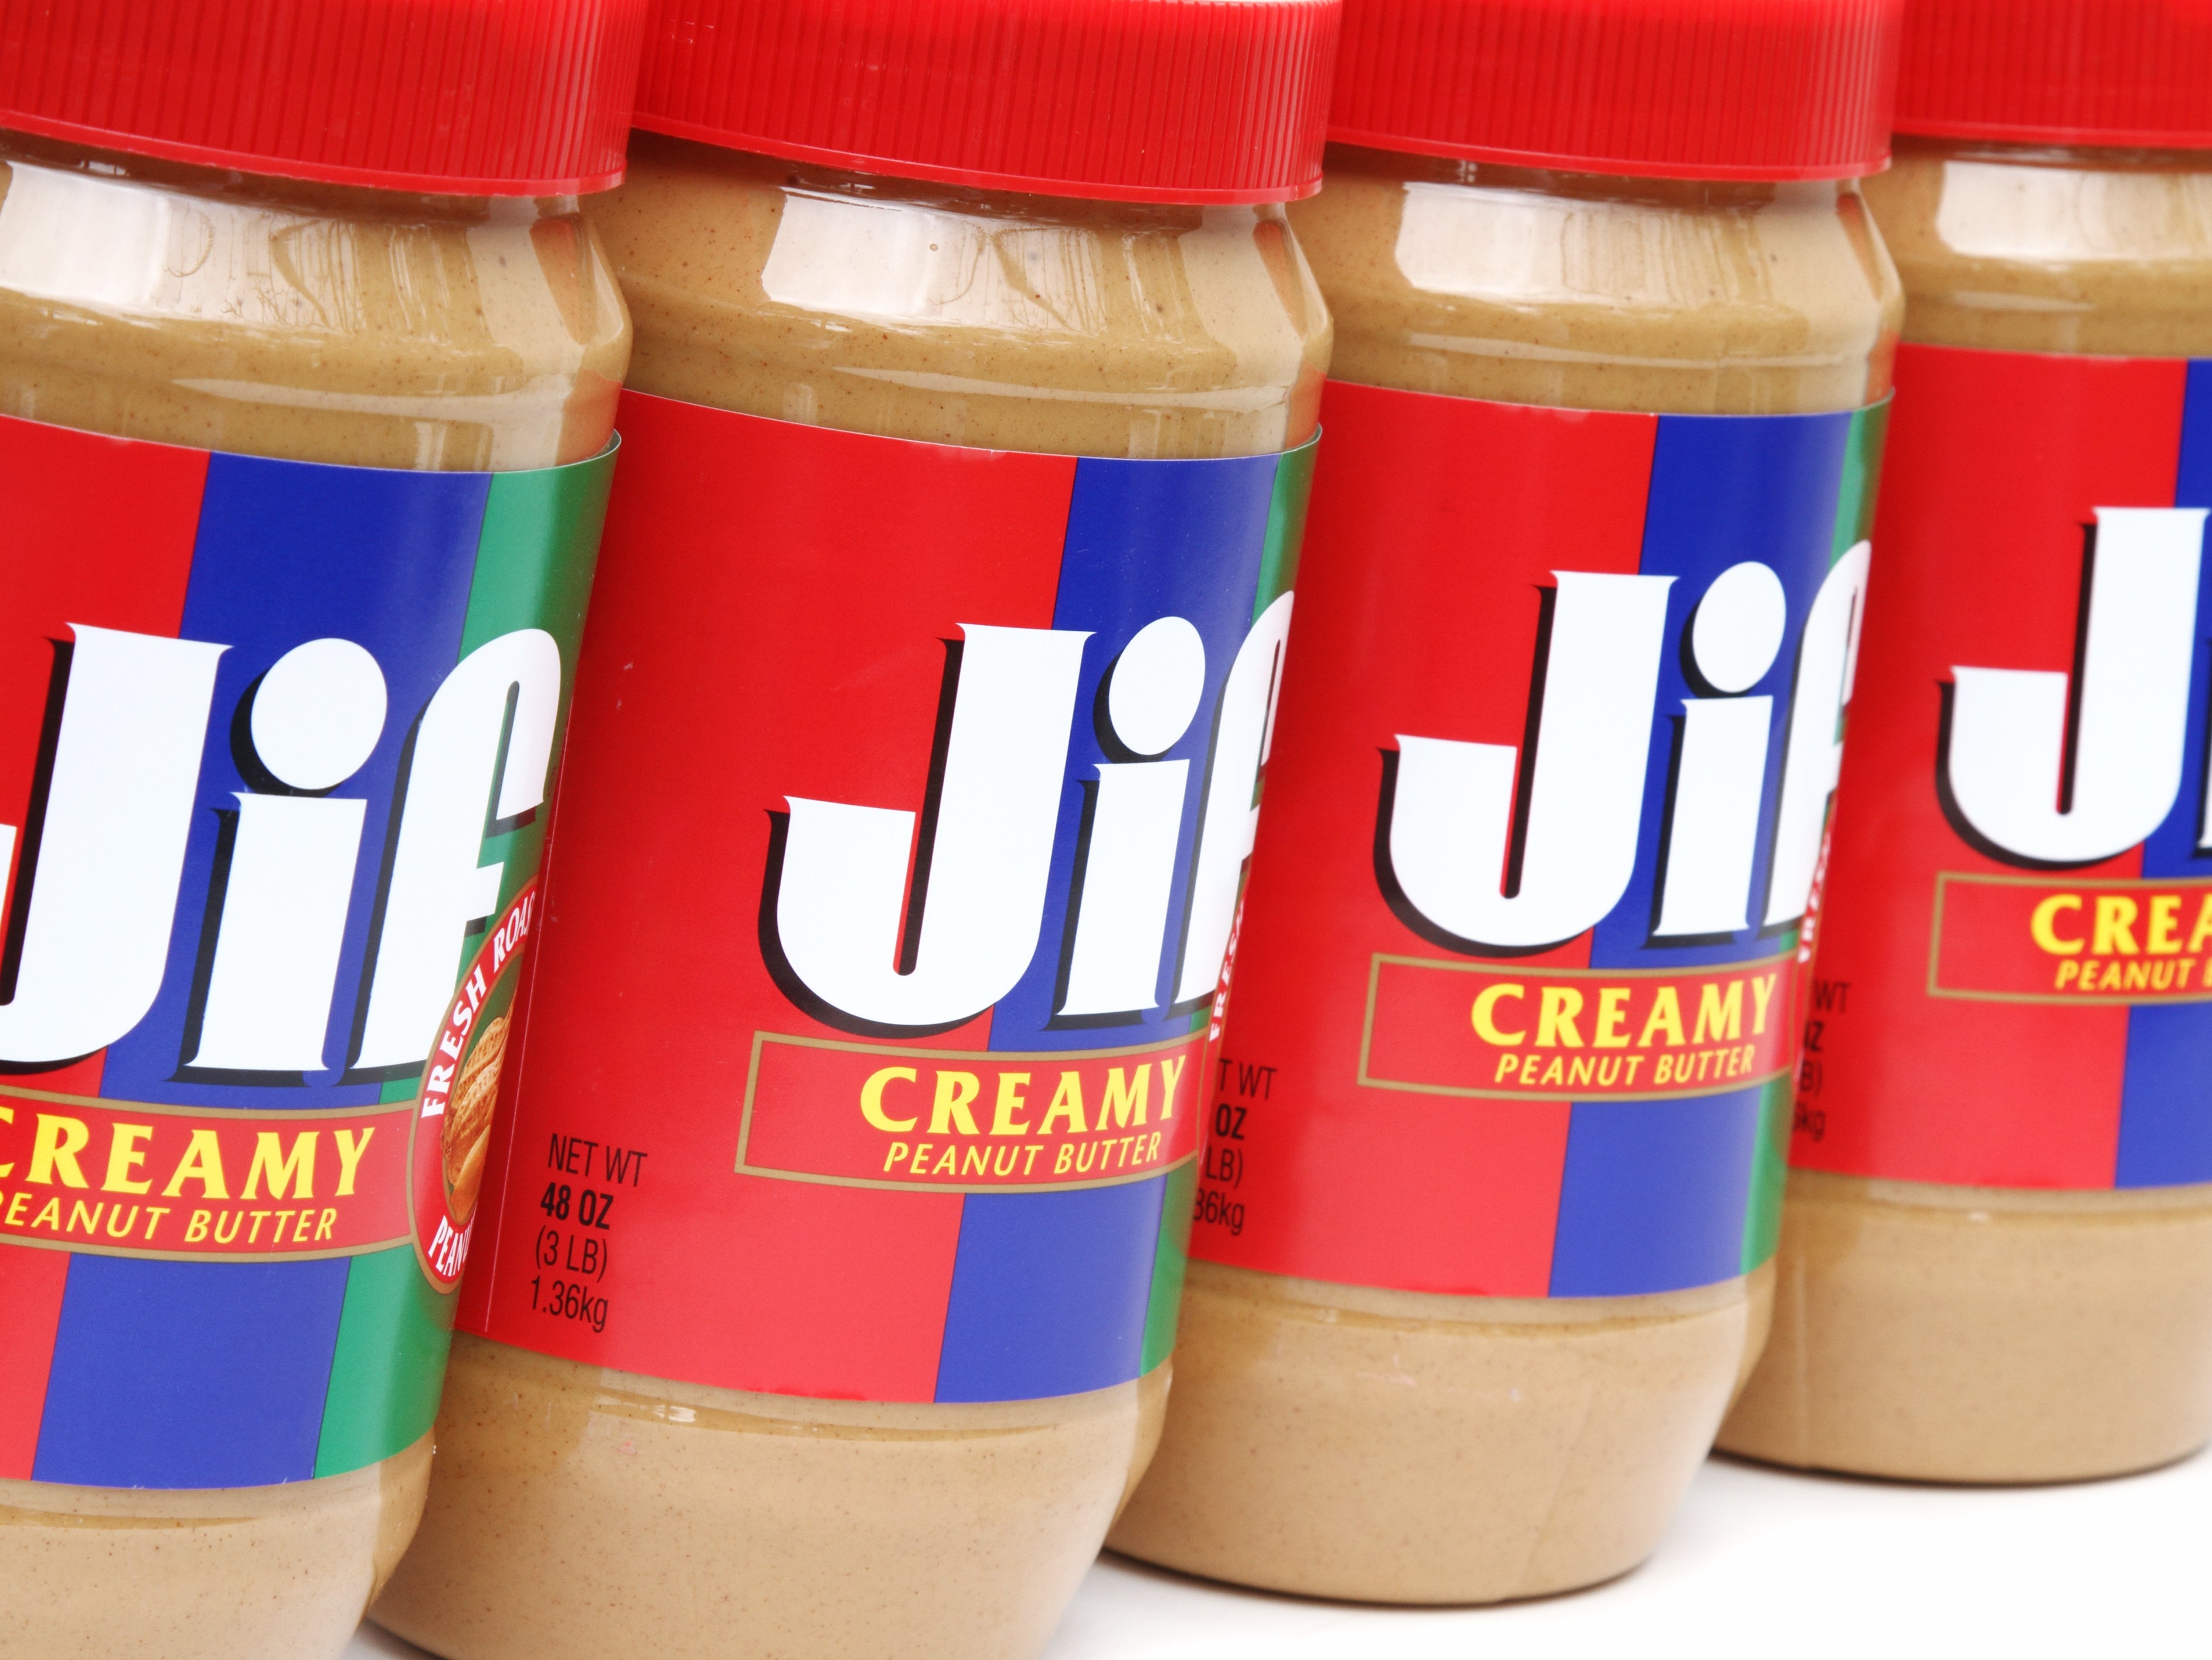 Jif peanut butter is produced at a facility in Lexington, Kentucky